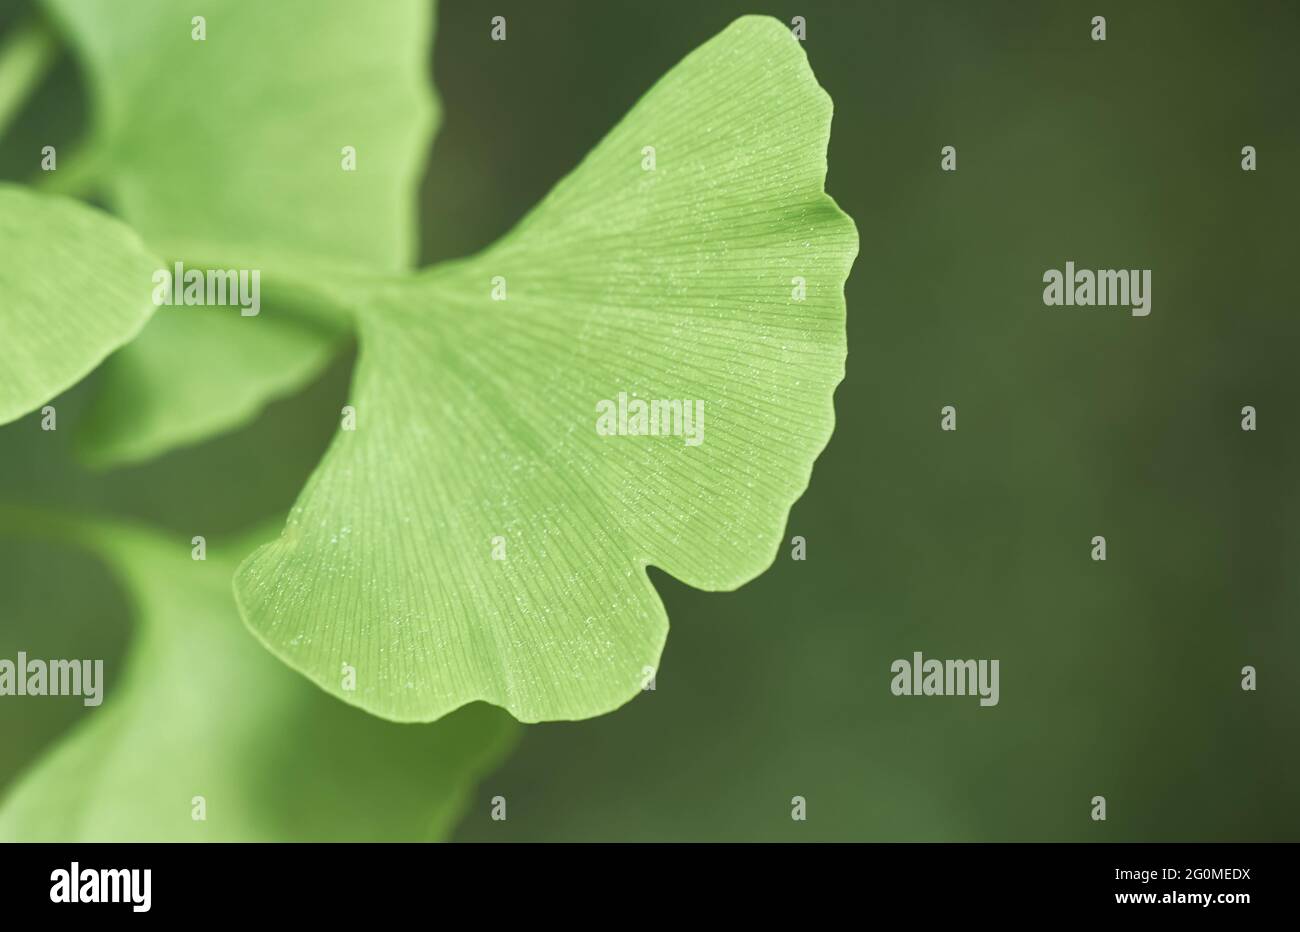 Leaf of young ginkgo tree, ginkgo biloba, cropped in front of blurred green background, monochrome Stock Photo